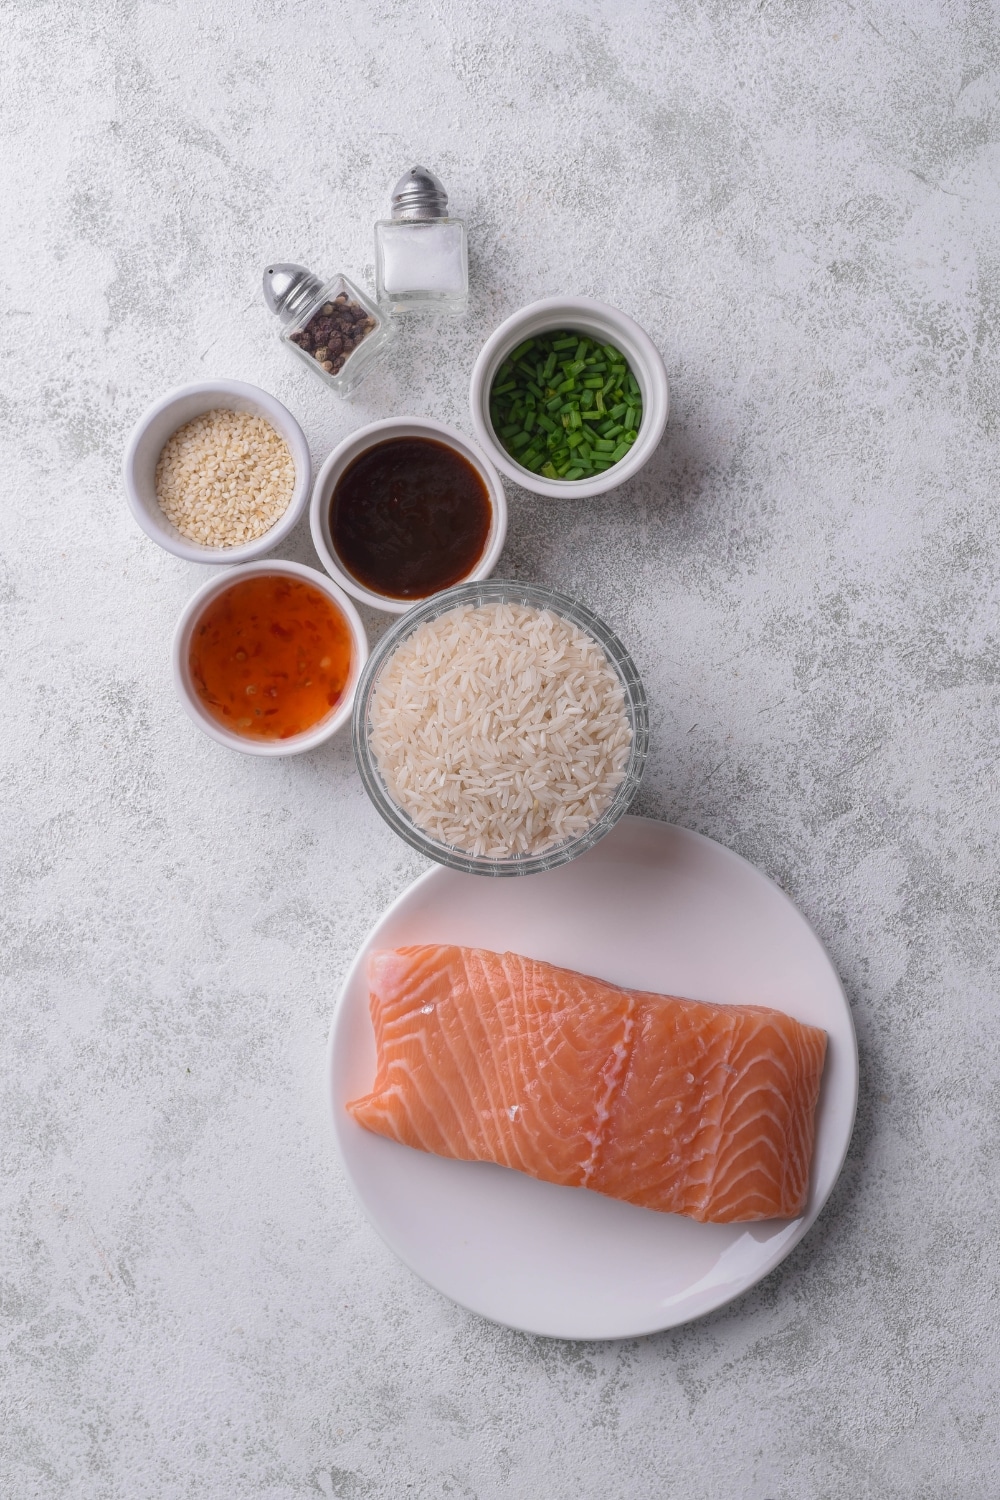 An overhead shot of various bowls of ingredients for salmon and rice including salmon, rice, teriyaki sauce, chili sauce, sesame seeds, and chives